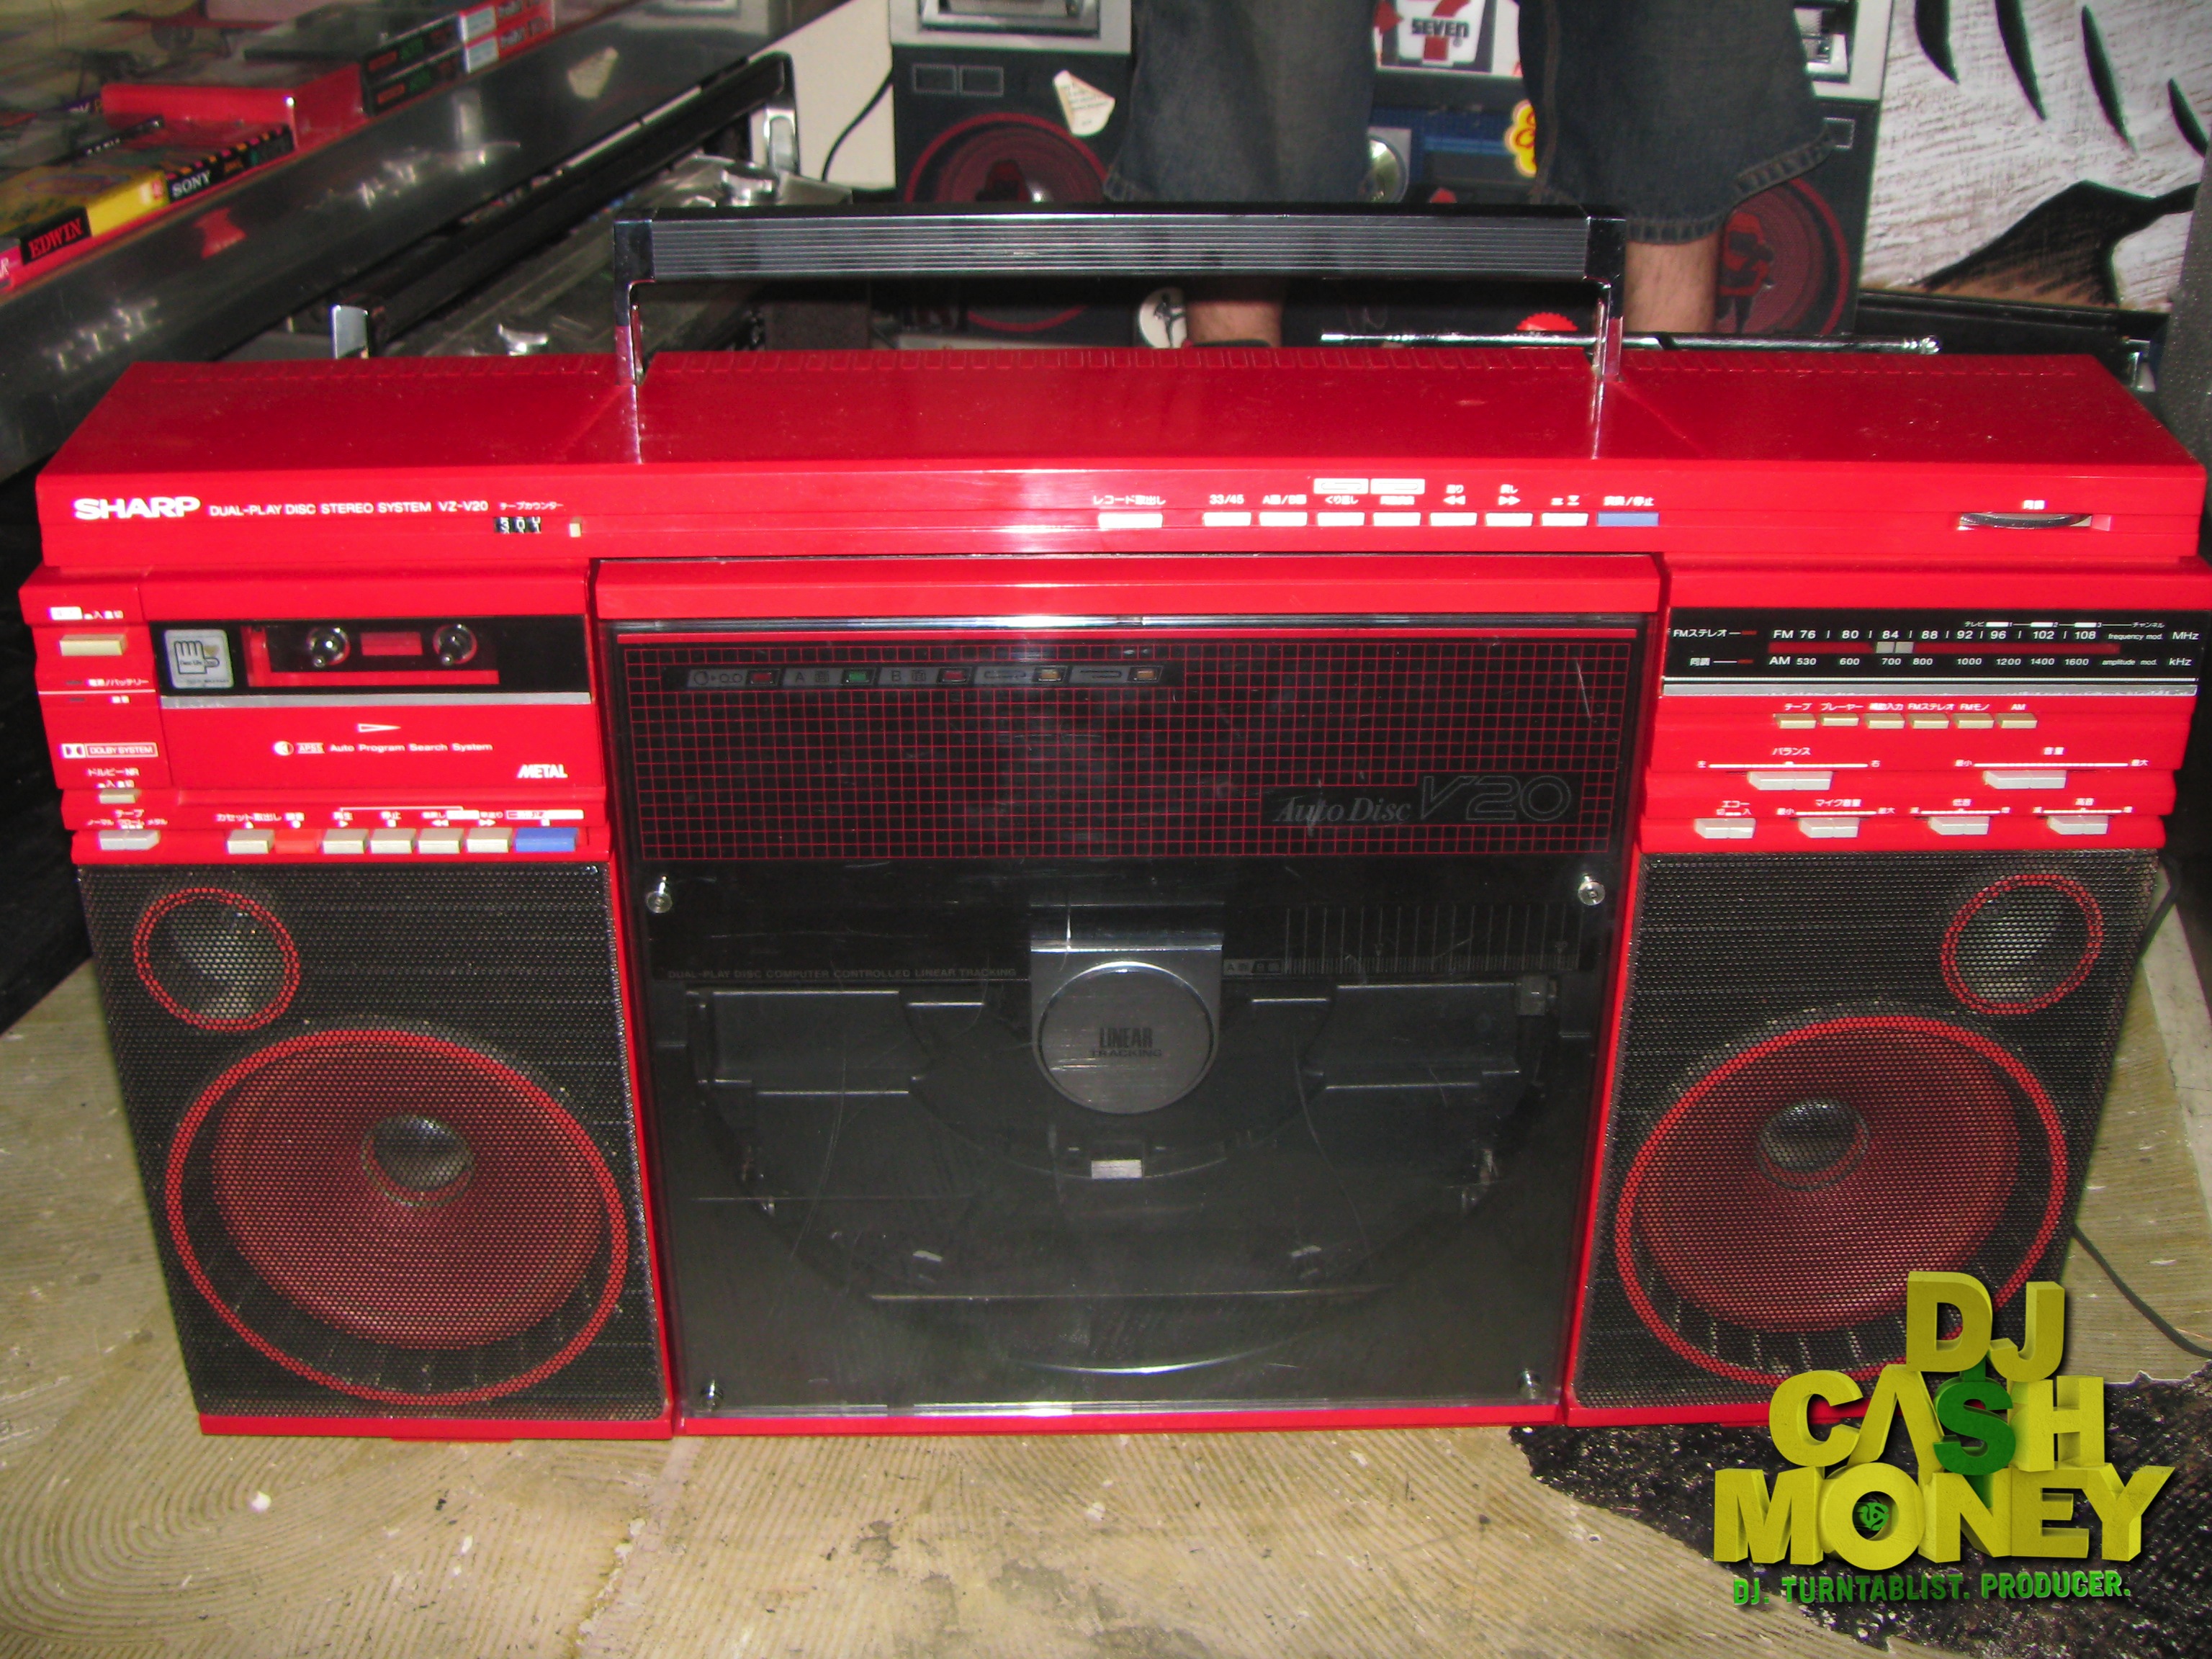 One of the rarest Boomboxes I have.Was only available in Japan